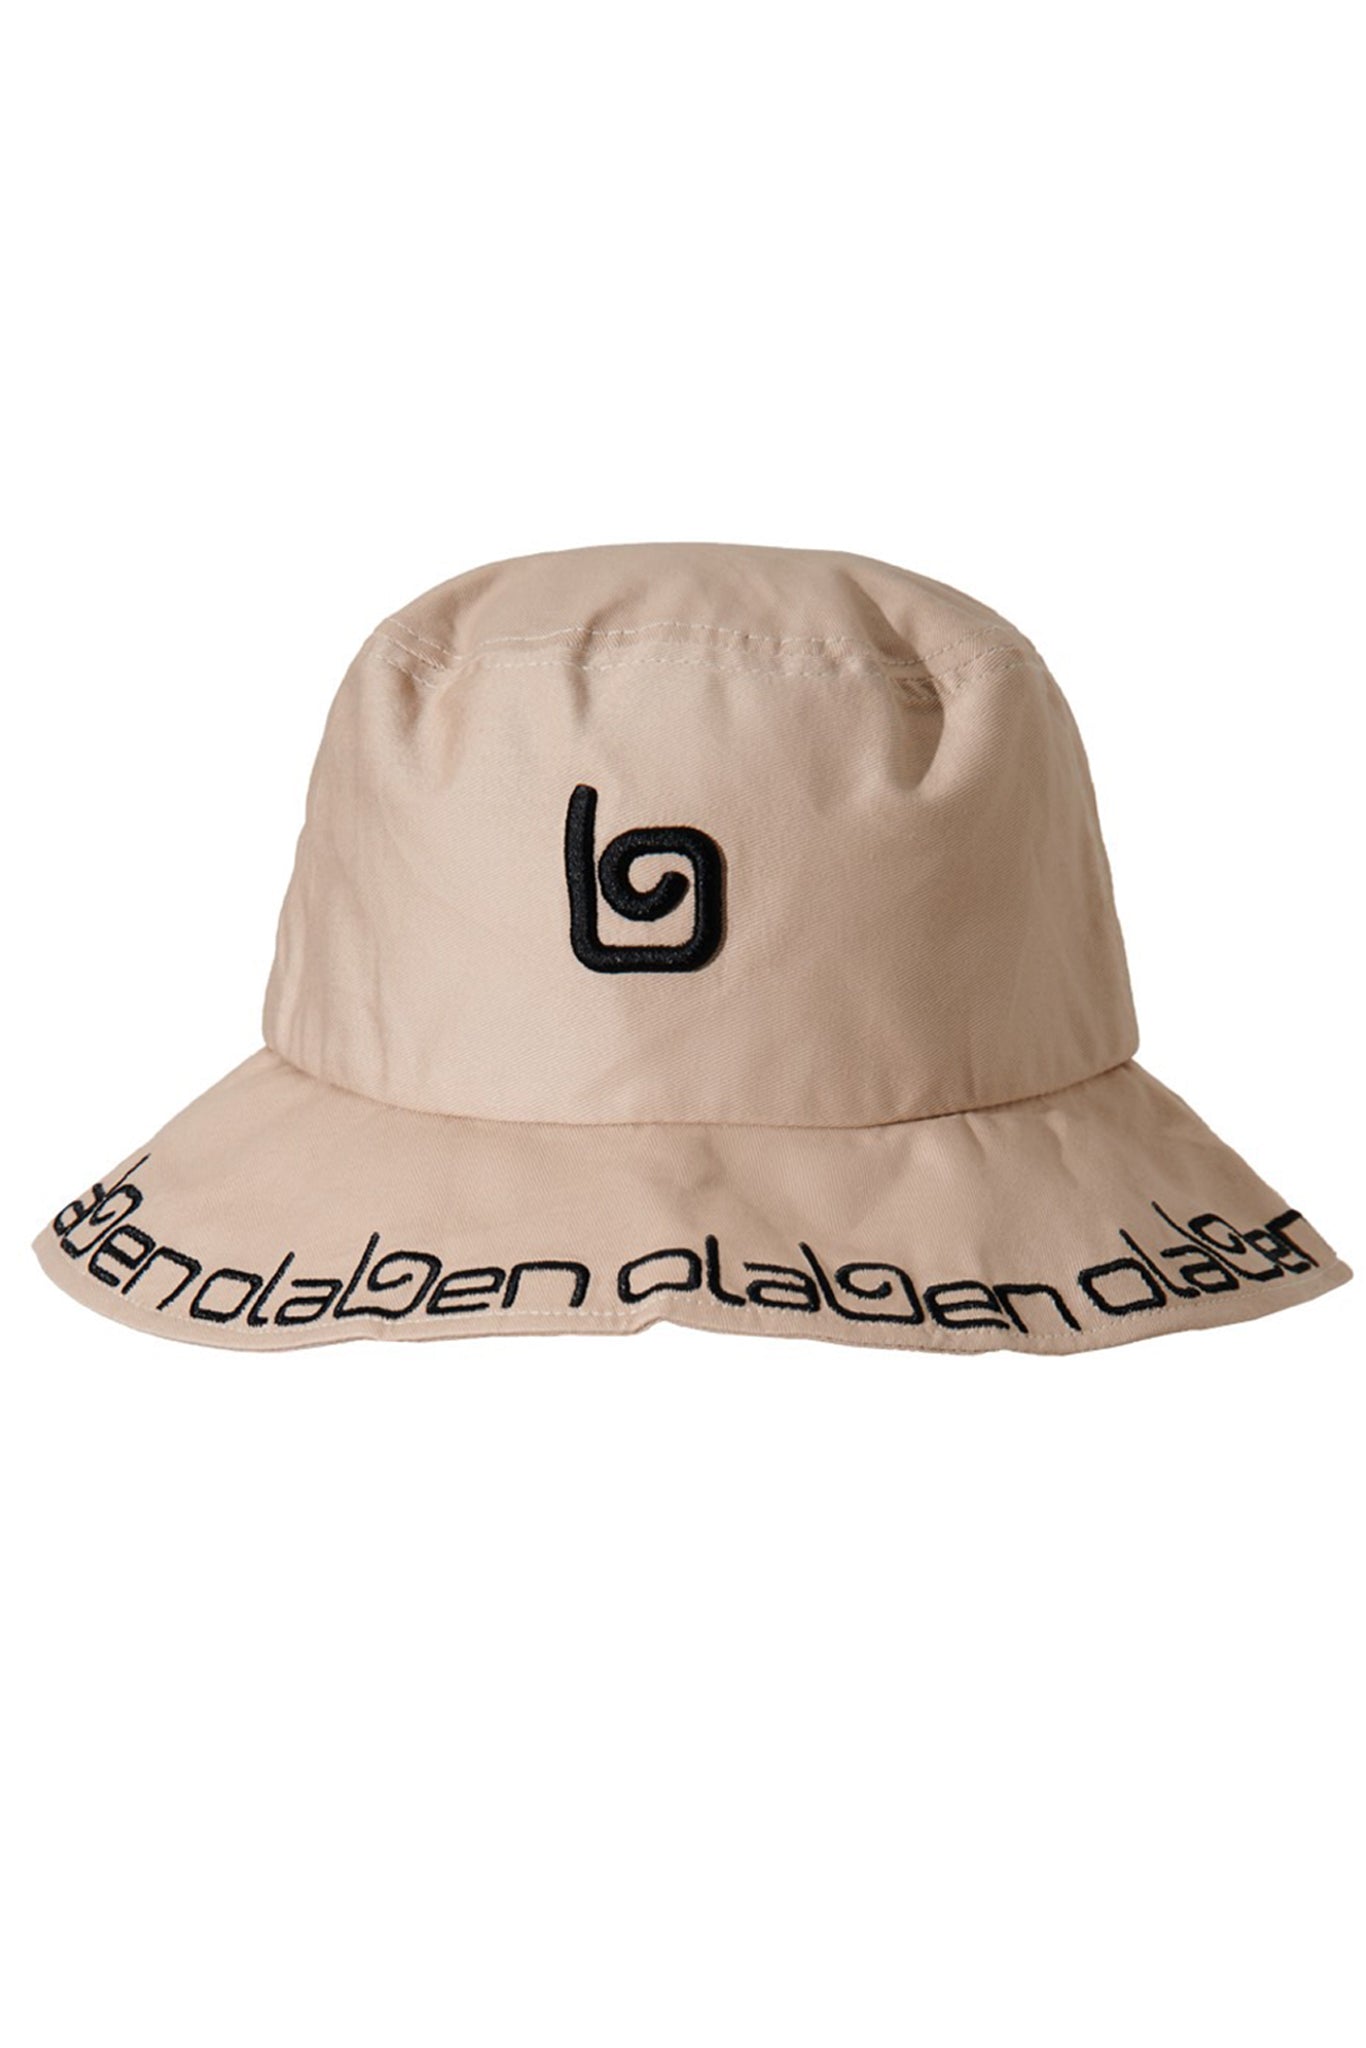 Beige bucket hat headwear with the brand name 'olaben' - OW-0153-UHW-BG - image 4.